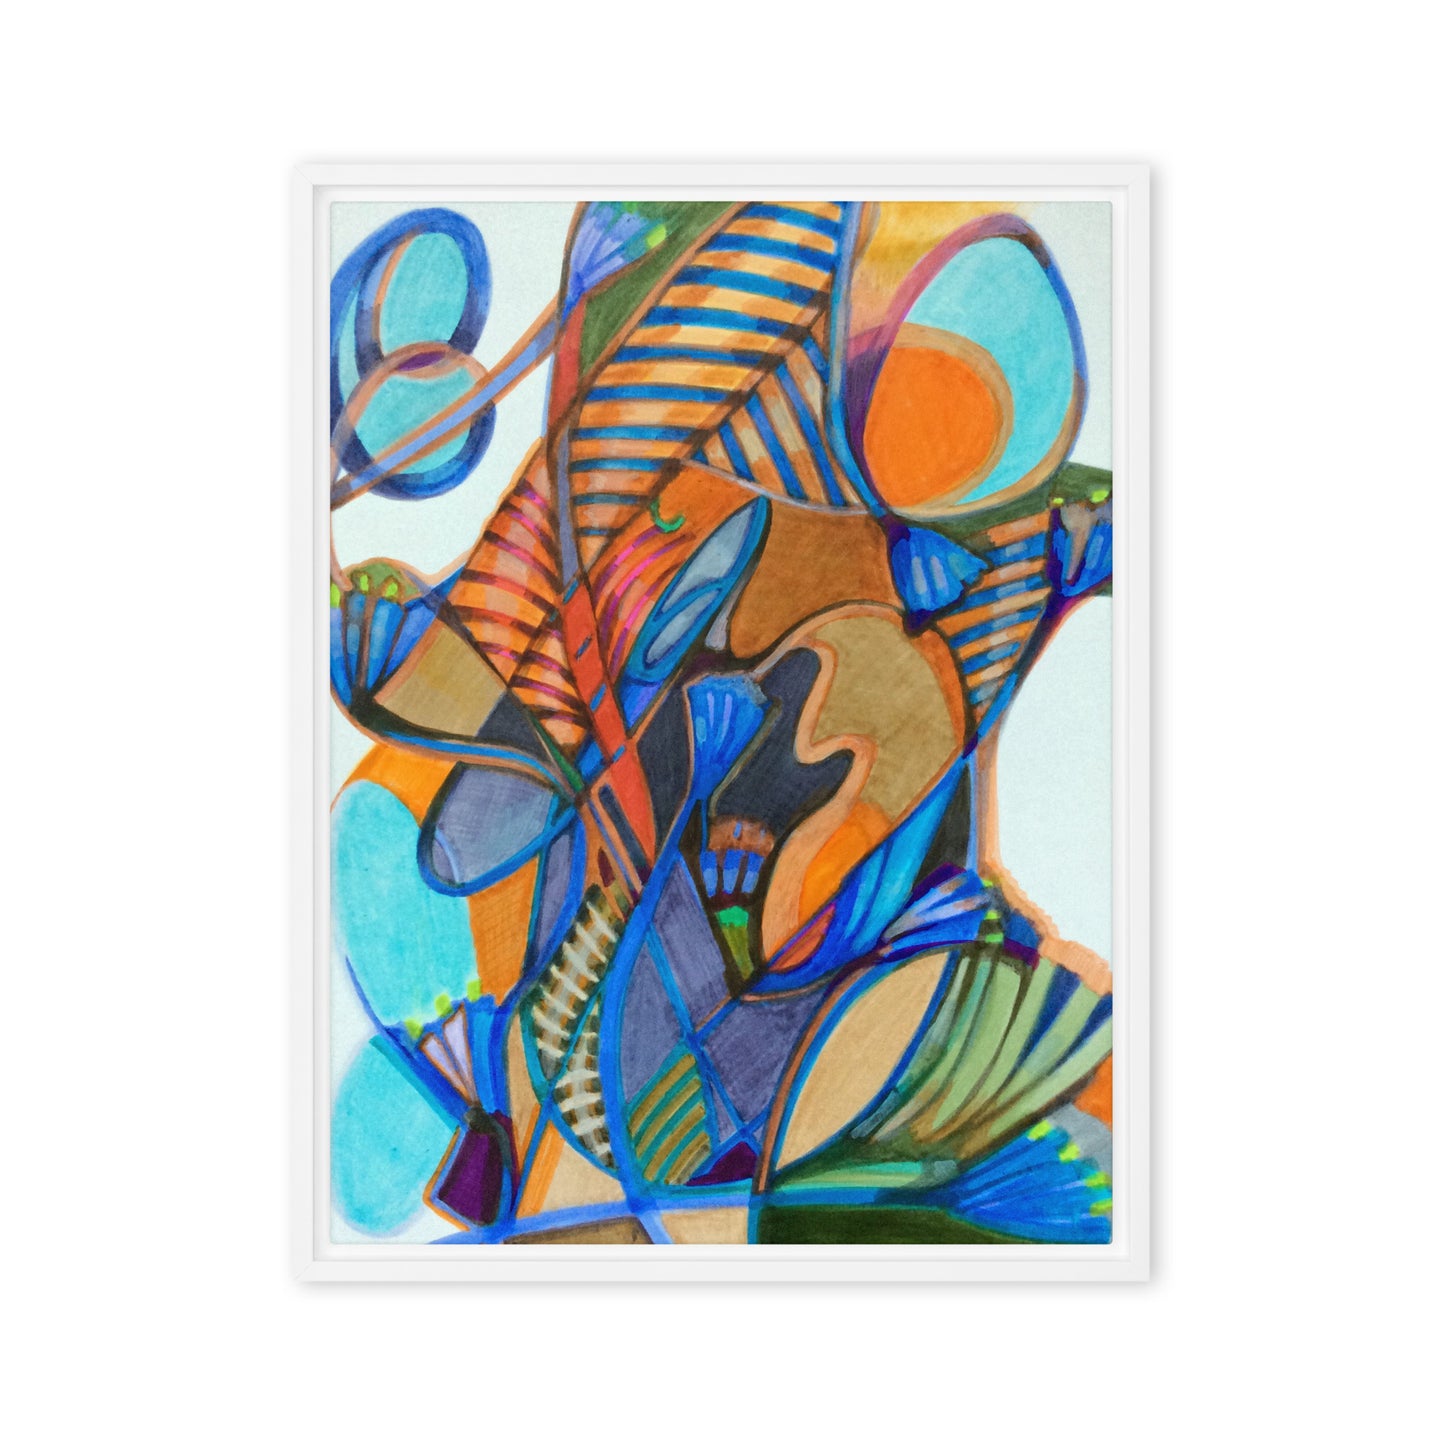 Penetration Abstract Framed canvas print